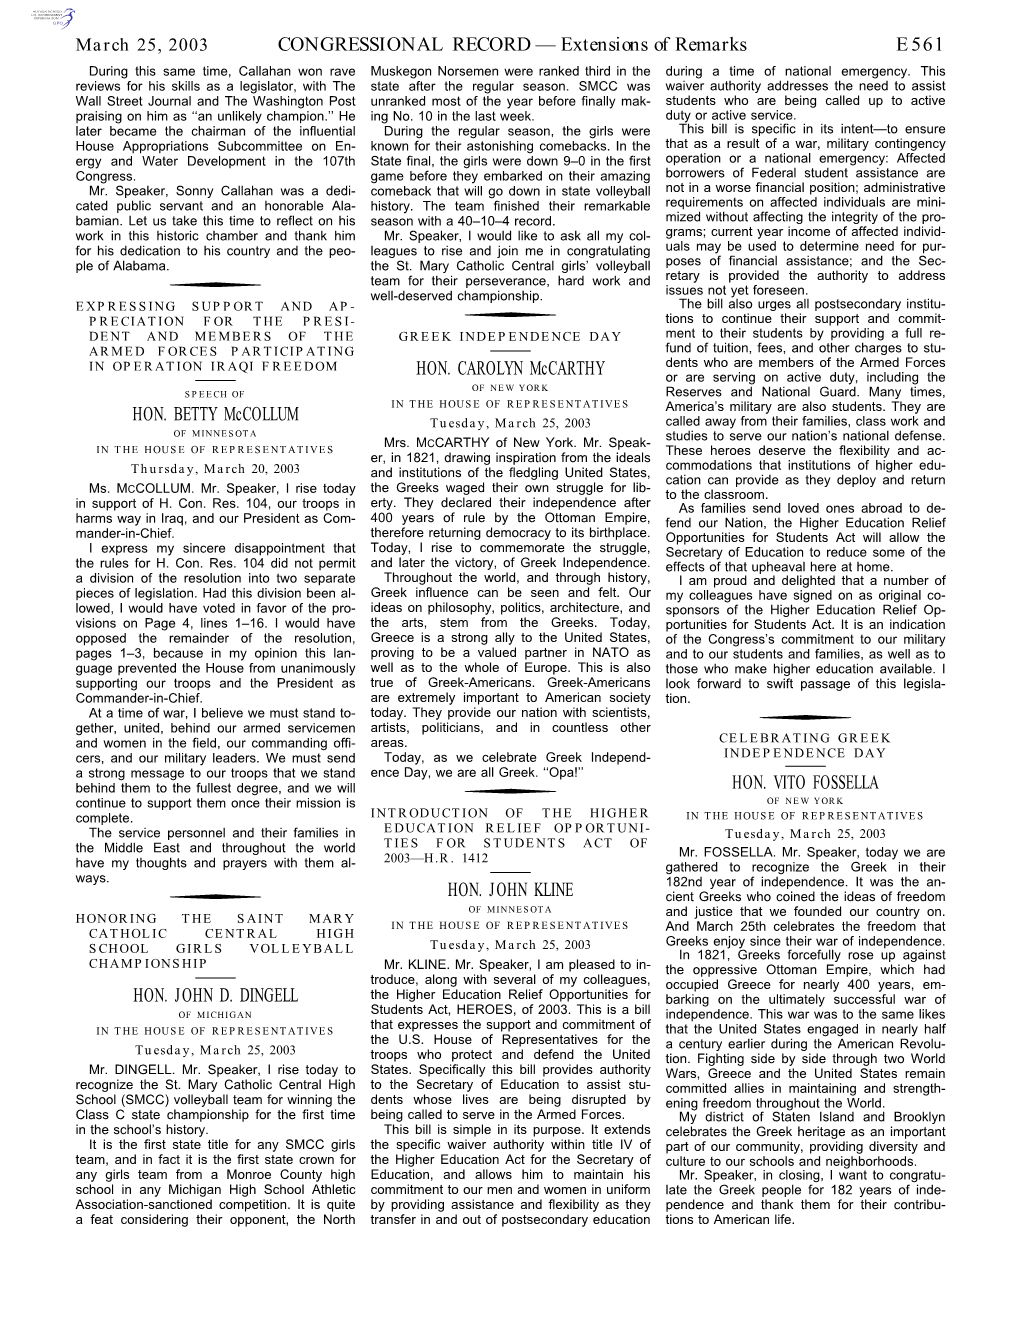 CONGRESSIONAL RECORD— Extensions of Remarks E561 HON